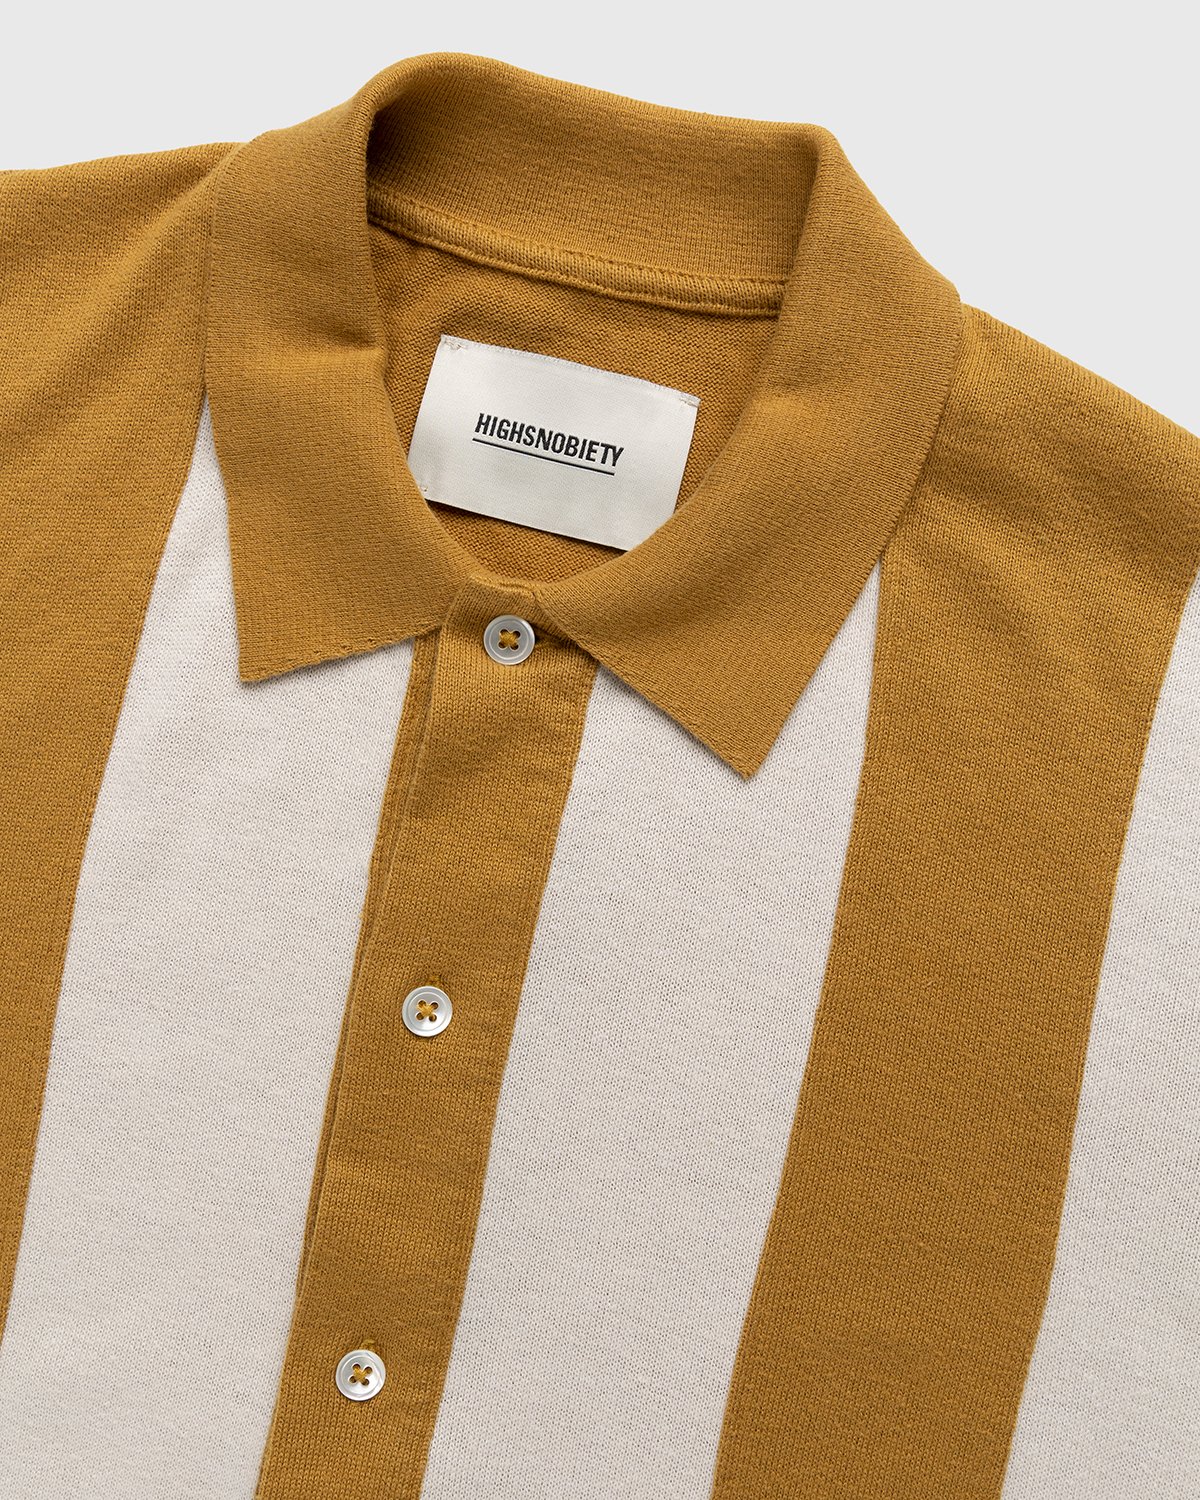 Highsnobiety - Knit Bowling Shirt Beige Brown - Clothing - Brown - Image 3